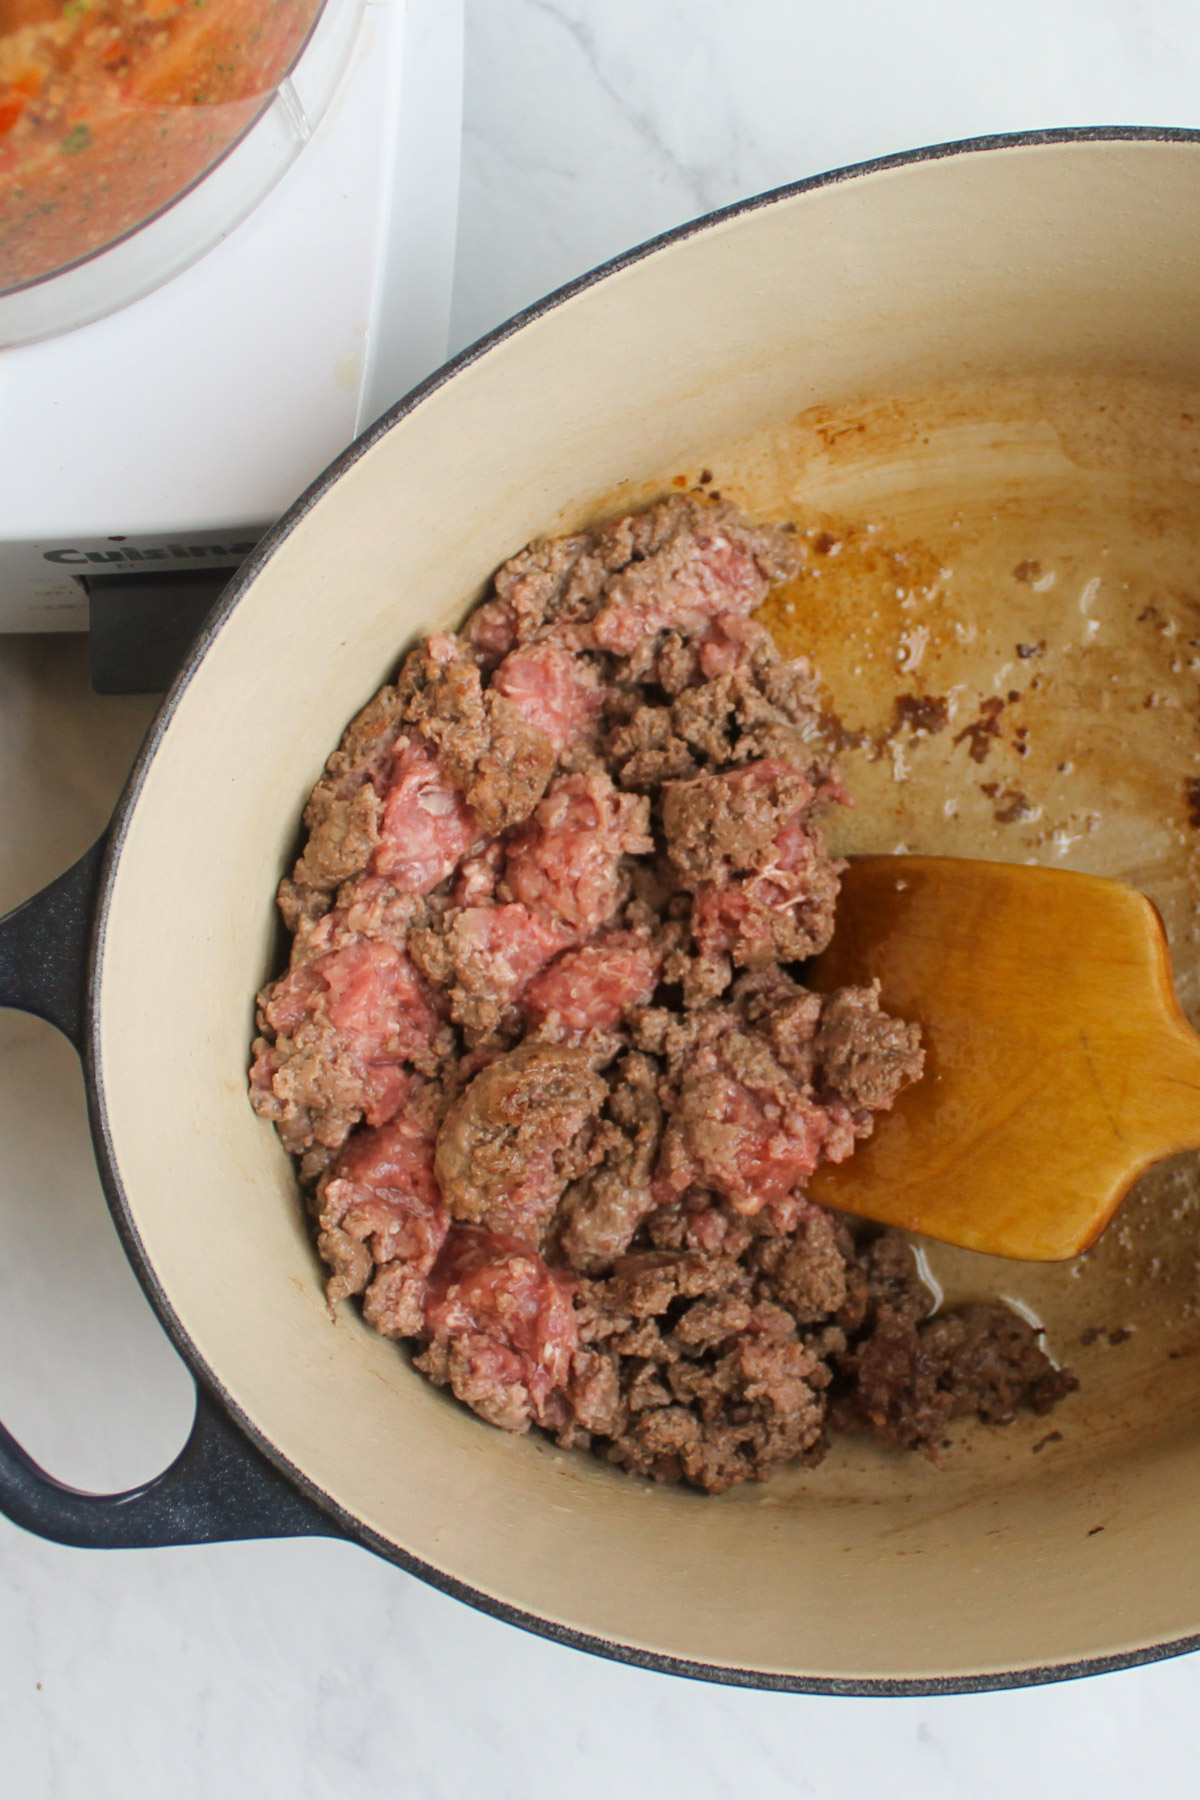 Browning ground beef in a pot with a wooden spoon.